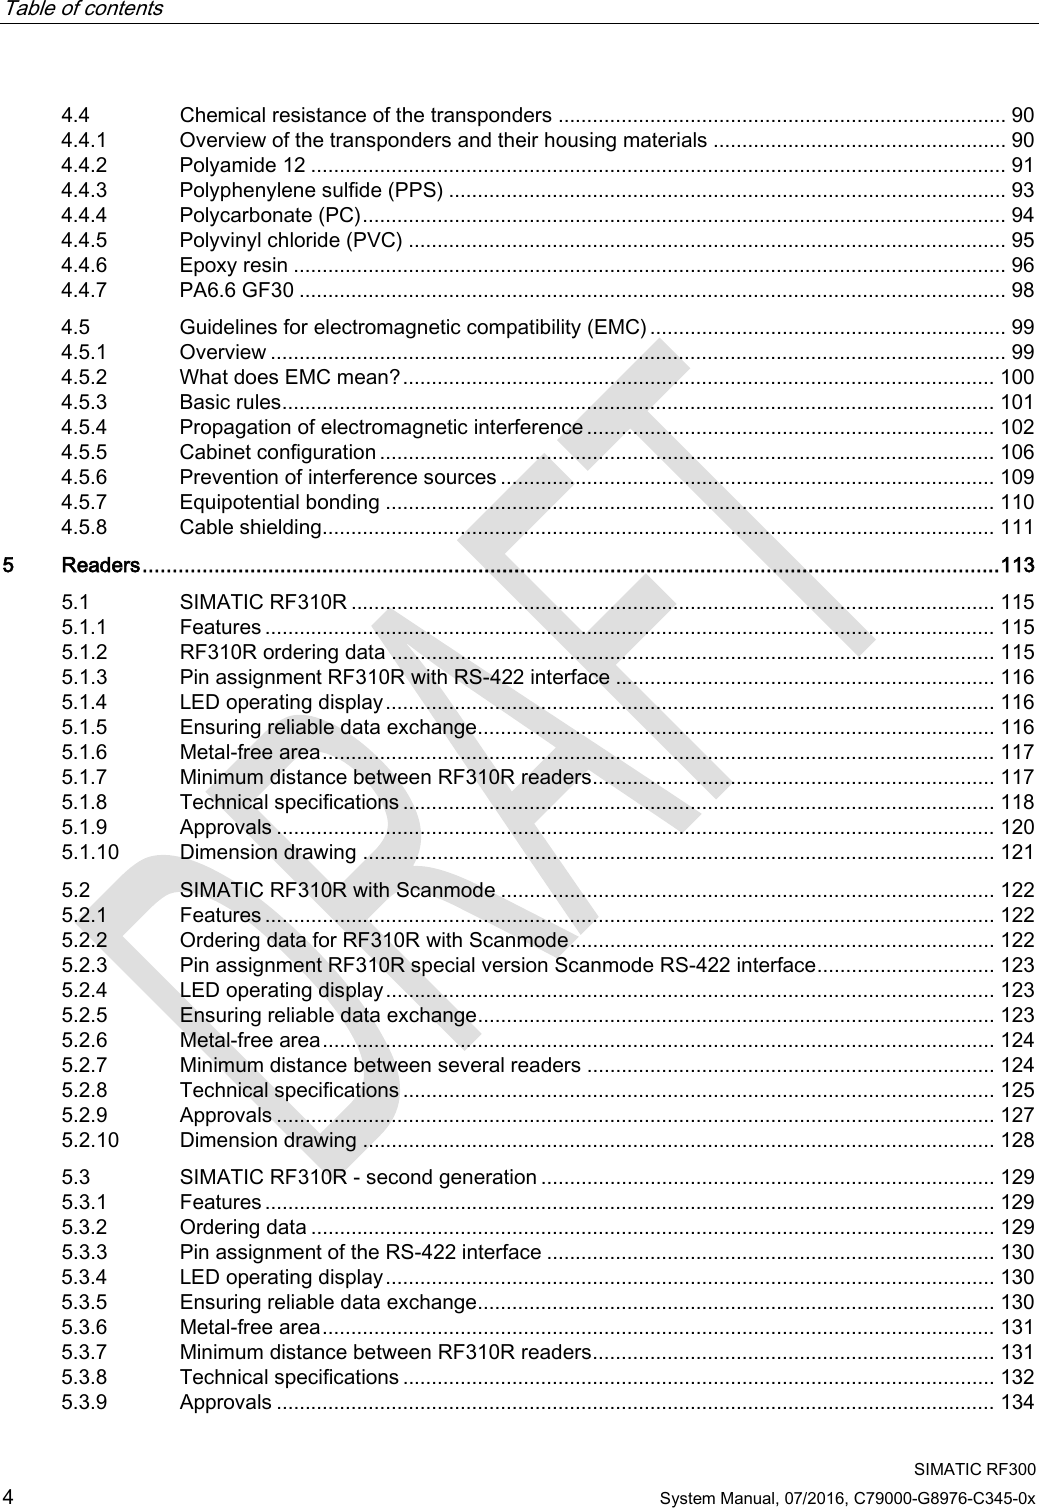 Table of contents     SIMATIC RF300 4 System Manual, 07/2016, C79000-G8976-C345-0x 4.4 Chemical resistance of the transponders .............................................................................. 90 4.4.1 Overview of the transponders and their housing materials ................................................... 90 4.4.2 Polyamide 12 ......................................................................................................................... 91 4.4.3 Polyphenylene sulfide (PPS) ................................................................................................. 93 4.4.4 Polycarbonate (PC) ................................................................................................................ 94 4.4.5 Polyvinyl chloride (PVC) ........................................................................................................ 95 4.4.6 Epoxy resin ............................................................................................................................ 96 4.4.7 PA6.6 GF30 ........................................................................................................................... 98 4.5 Guidelines for electromagnetic compatibility (EMC) .............................................................. 99 4.5.1 Overview ................................................................................................................................ 99 4.5.2 What does EMC mean? ....................................................................................................... 100 4.5.3 Basic rules ............................................................................................................................ 101 4.5.4 Propagation of electromagnetic interference ....................................................................... 102 4.5.5 Cabinet configuration ........................................................................................................... 106 4.5.6 Prevention of interference sources ...................................................................................... 109 4.5.7 Equipotential bonding .......................................................................................................... 110 4.5.8 Cable shielding..................................................................................................................... 111 5  Readers ............................................................................................................................................... 113 5.1 SIMATIC RF310R ................................................................................................................ 115 5.1.1 Features ............................................................................................................................... 115 5.1.2 RF310R ordering data ......................................................................................................... 115 5.1.3 Pin assignment RF310R with RS-422 interface .................................................................. 116 5.1.4 LED operating display .......................................................................................................... 116 5.1.5 Ensuring reliable data exchange .......................................................................................... 116 5.1.6 Metal-free area ..................................................................................................................... 117 5.1.7 Minimum distance between RF310R readers ...................................................................... 117 5.1.8 Technical specifications ....................................................................................................... 118 5.1.9 Approvals ............................................................................................................................. 120 5.1.10 Dimension drawing .............................................................................................................. 121 5.2 SIMATIC RF310R with Scanmode ...................................................................................... 122 5.2.1 Features ............................................................................................................................... 122 5.2.2 Ordering data for RF310R with Scanmode .......................................................................... 122 5.2.3 Pin assignment RF310R special version Scanmode RS-422 interface ............................... 123 5.2.4 LED operating display .......................................................................................................... 123 5.2.5 Ensuring reliable data exchange .......................................................................................... 123 5.2.6 Metal-free area ..................................................................................................................... 124 5.2.7 Minimum distance between several readers ....................................................................... 124 5.2.8 Technical specifications ....................................................................................................... 125 5.2.9 Approvals ............................................................................................................................. 127 5.2.10 Dimension drawing .............................................................................................................. 128 5.3 SIMATIC RF310R - second generation ............................................................................... 129 5.3.1 Features ............................................................................................................................... 129 5.3.2 Ordering data ....................................................................................................................... 129 5.3.3 Pin assignment of the RS-422 interface .............................................................................. 130 5.3.4 LED operating display .......................................................................................................... 130 5.3.5 Ensuring reliable data exchange .......................................................................................... 130 5.3.6 Metal-free area ..................................................................................................................... 131 5.3.7 Minimum distance between RF310R readers ...................................................................... 131 5.3.8 Technical specifications ....................................................................................................... 132 5.3.9 Approvals ............................................................................................................................. 134 